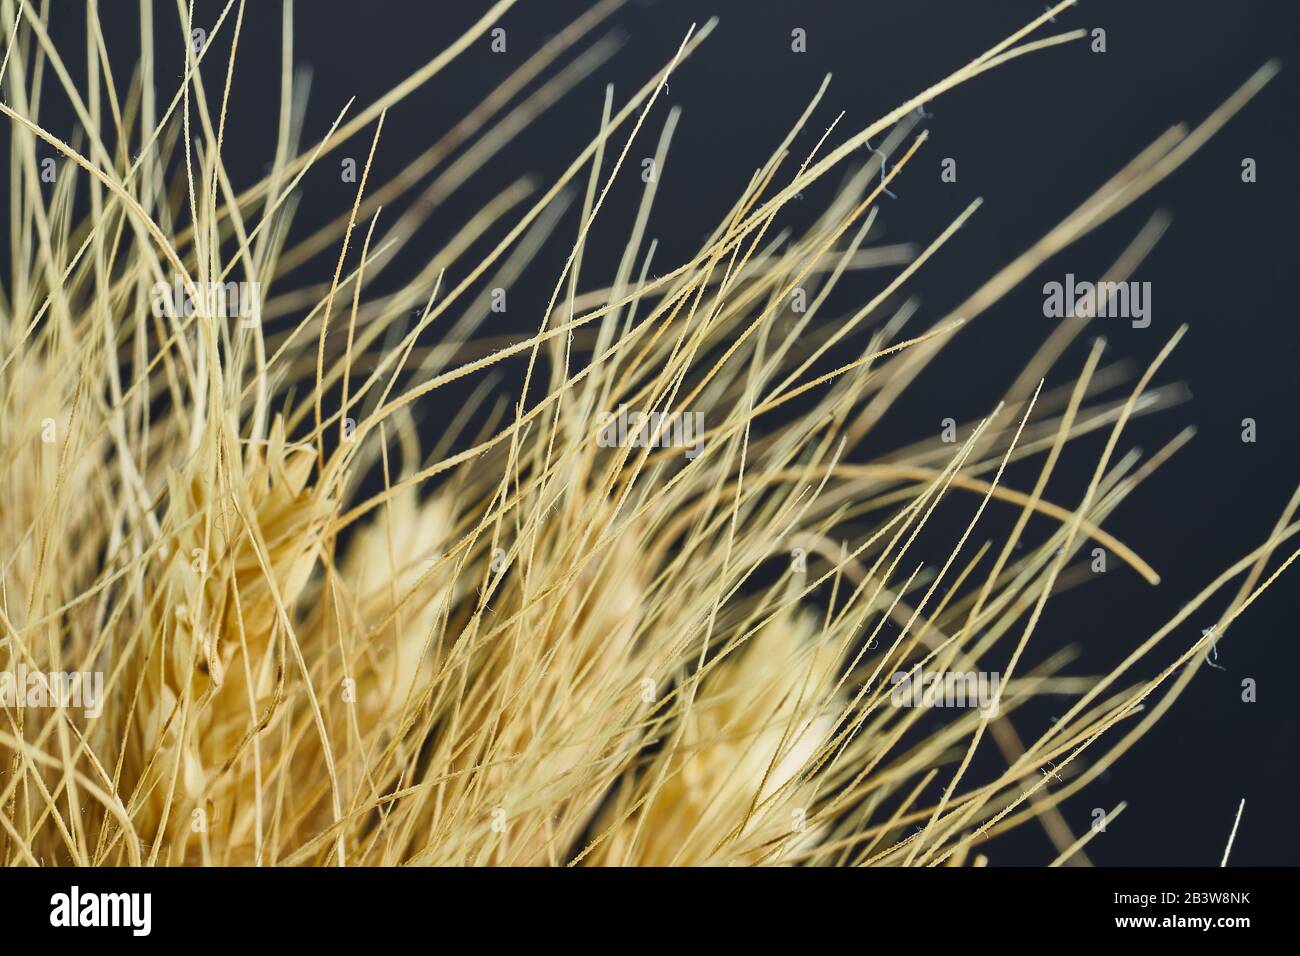 The rye crop Secale cereale close up shot macro. Stock Photo